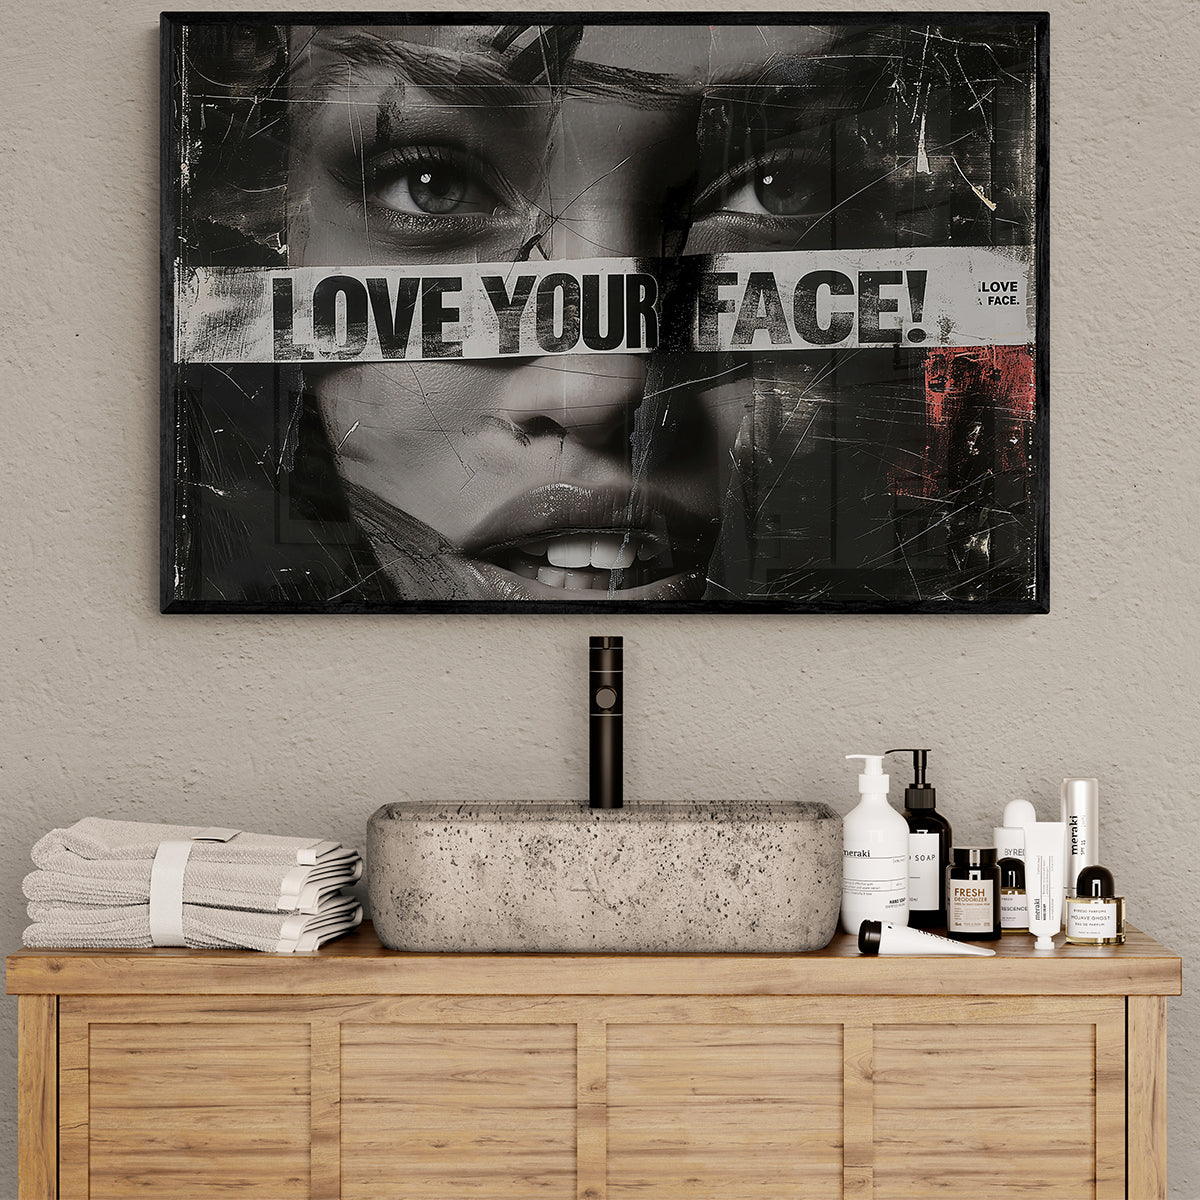 Contemporary framed print by Milton Wes Art with the text 'I Love Your Face' displayed above a modern bathroom sink, available for purchase.